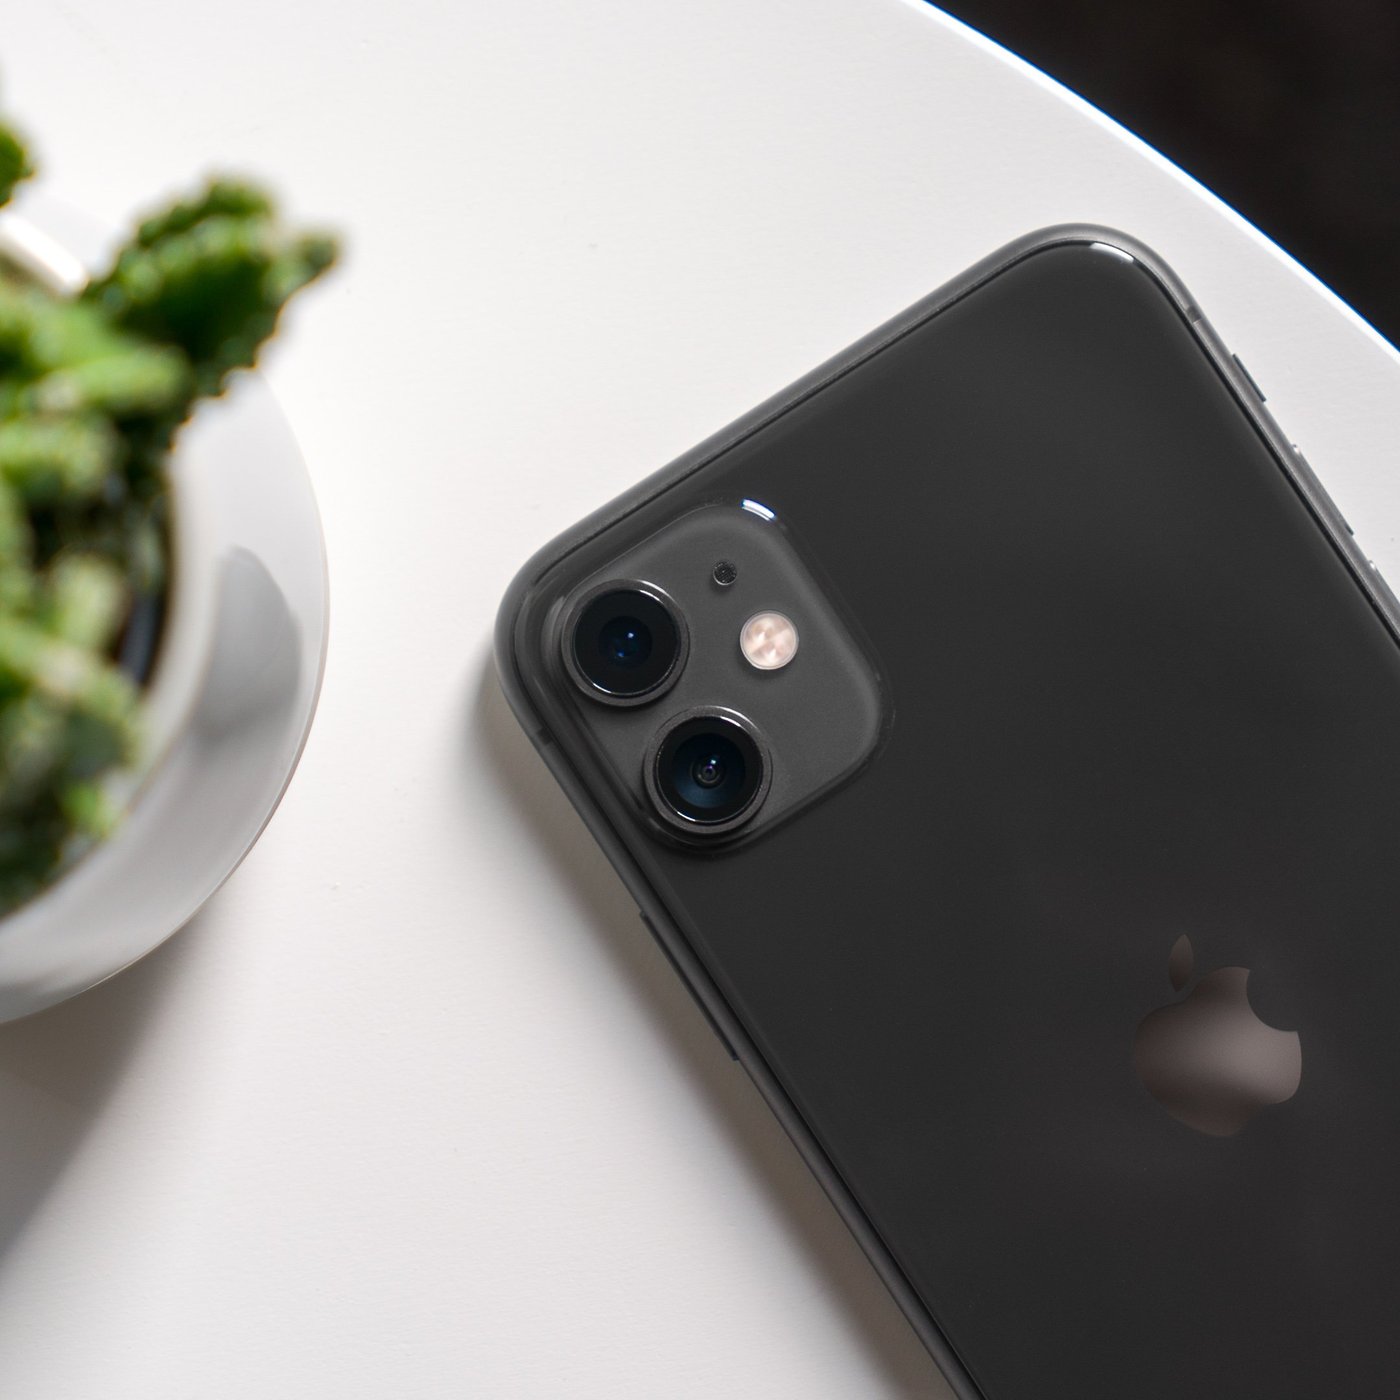 Apple iPhone 11 camera review: better than Android smartphones